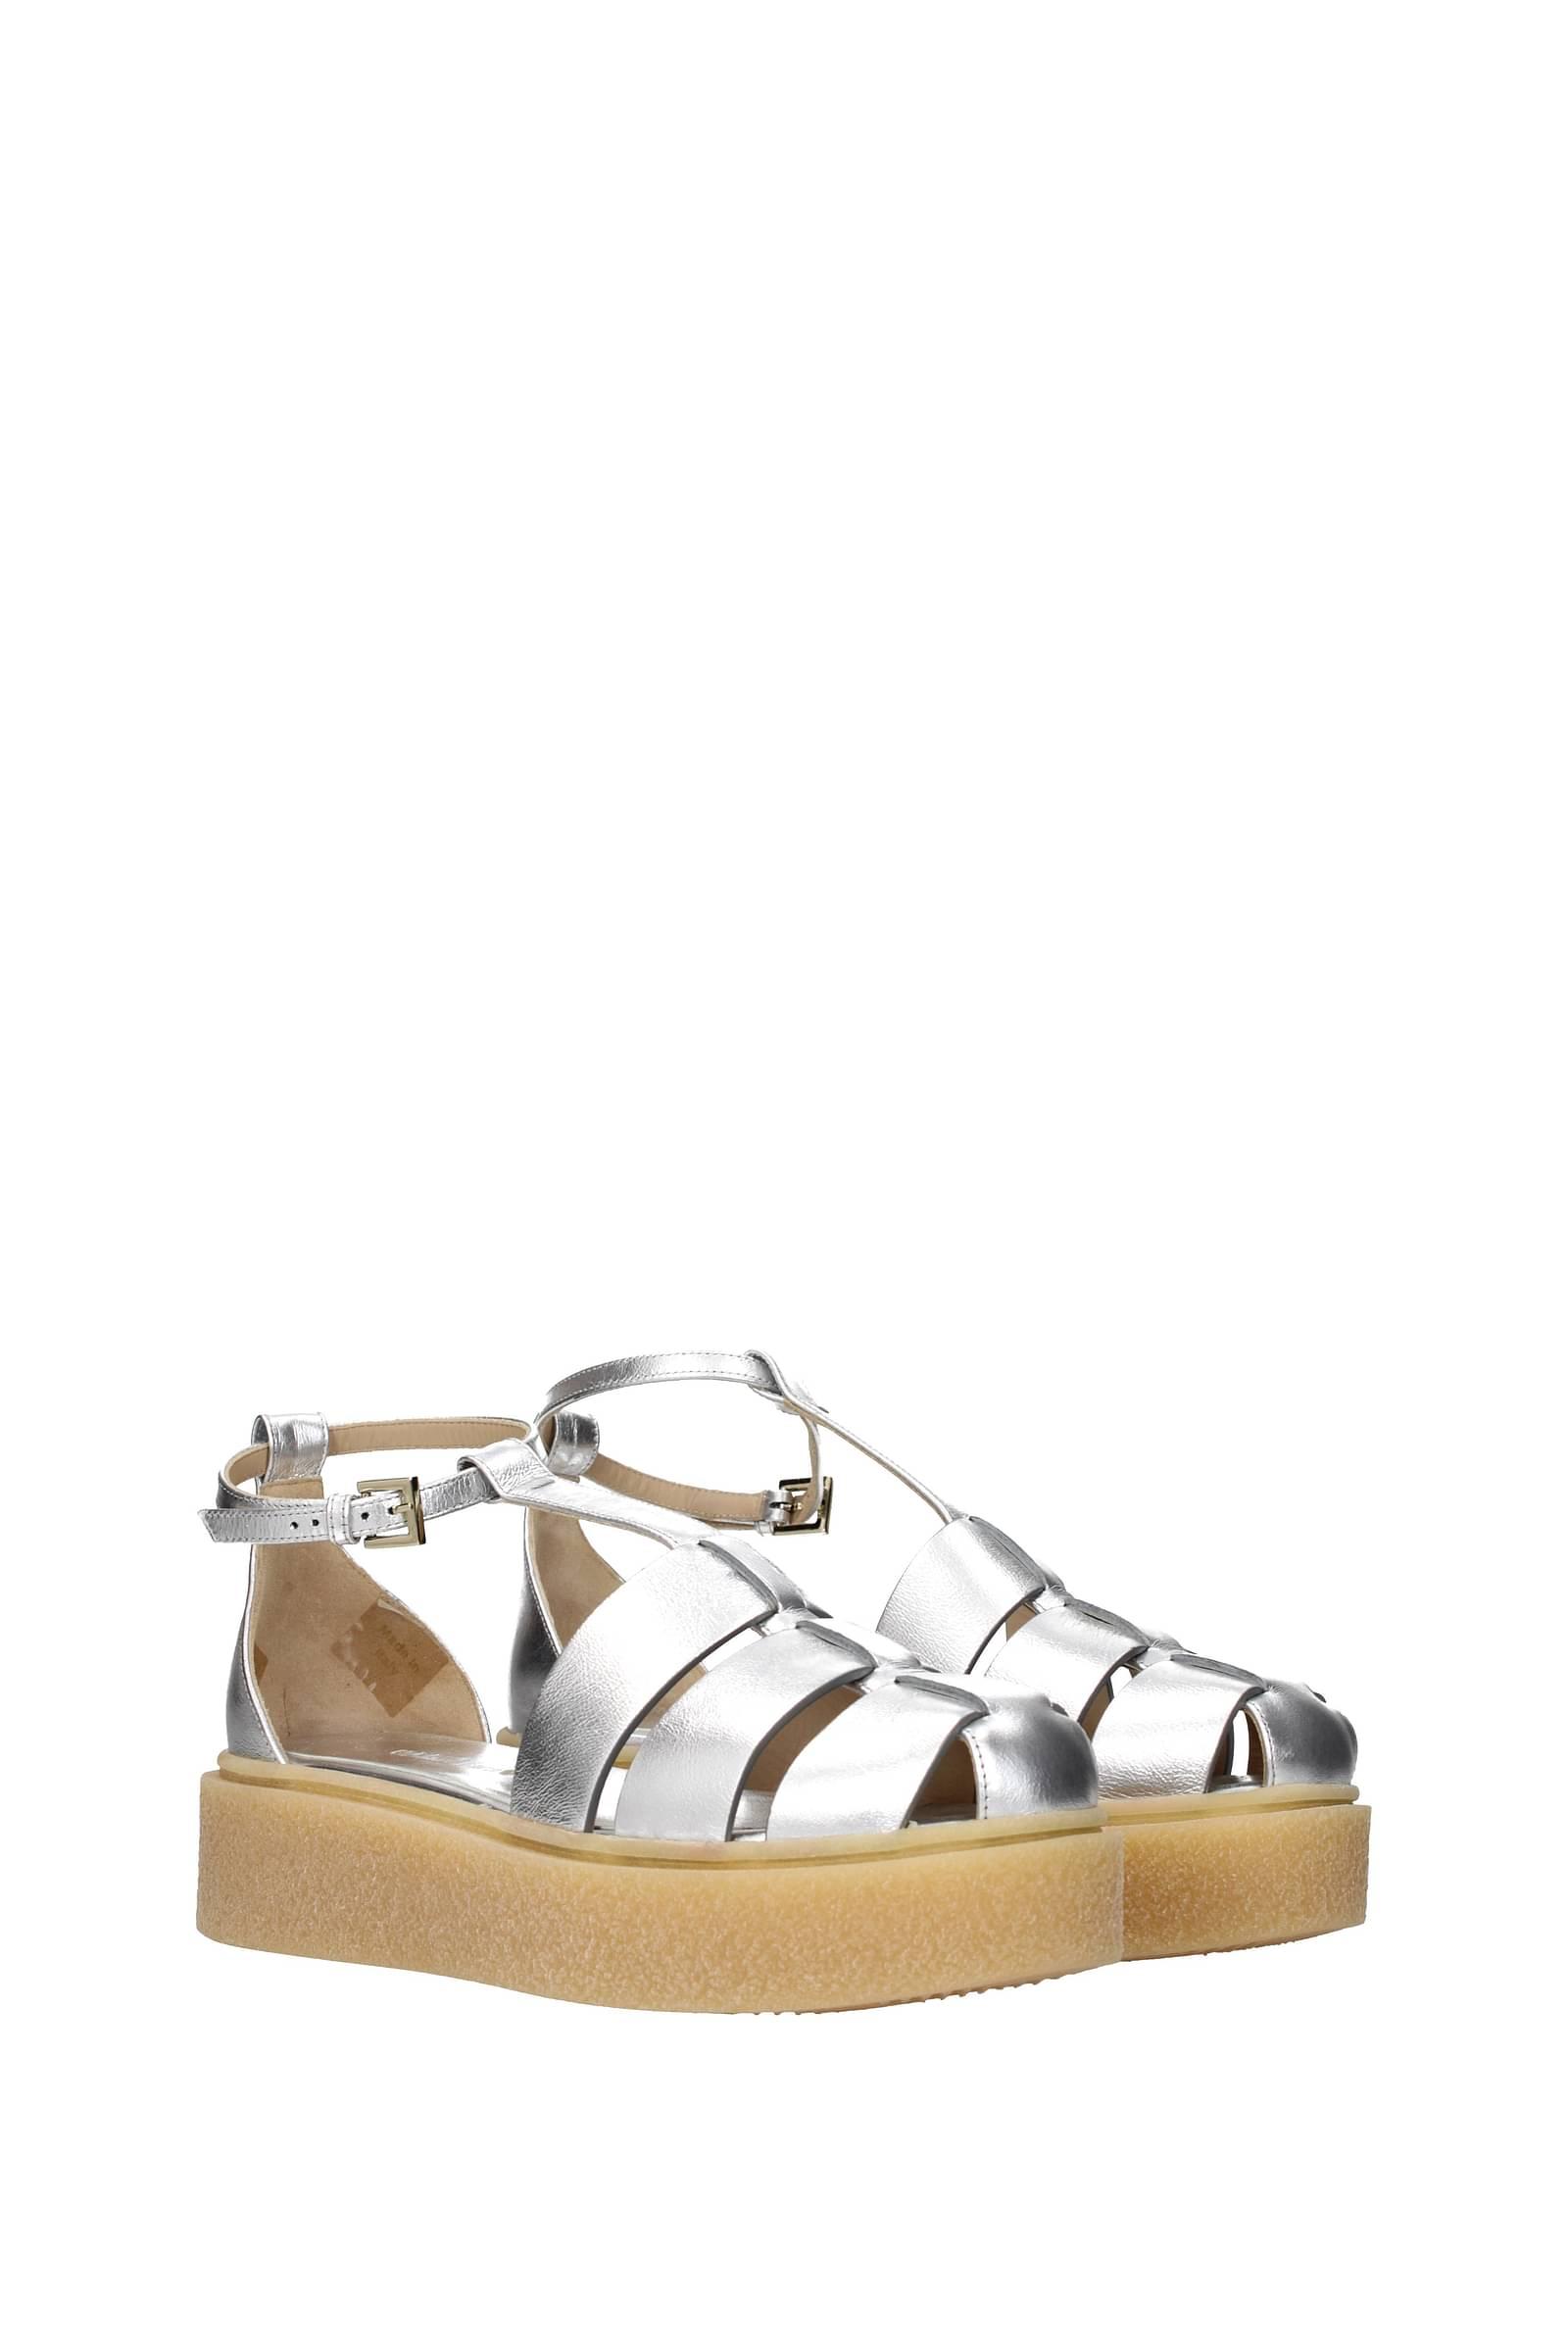 Max Mara Sandals Gums Leather Silver in White | Lyst